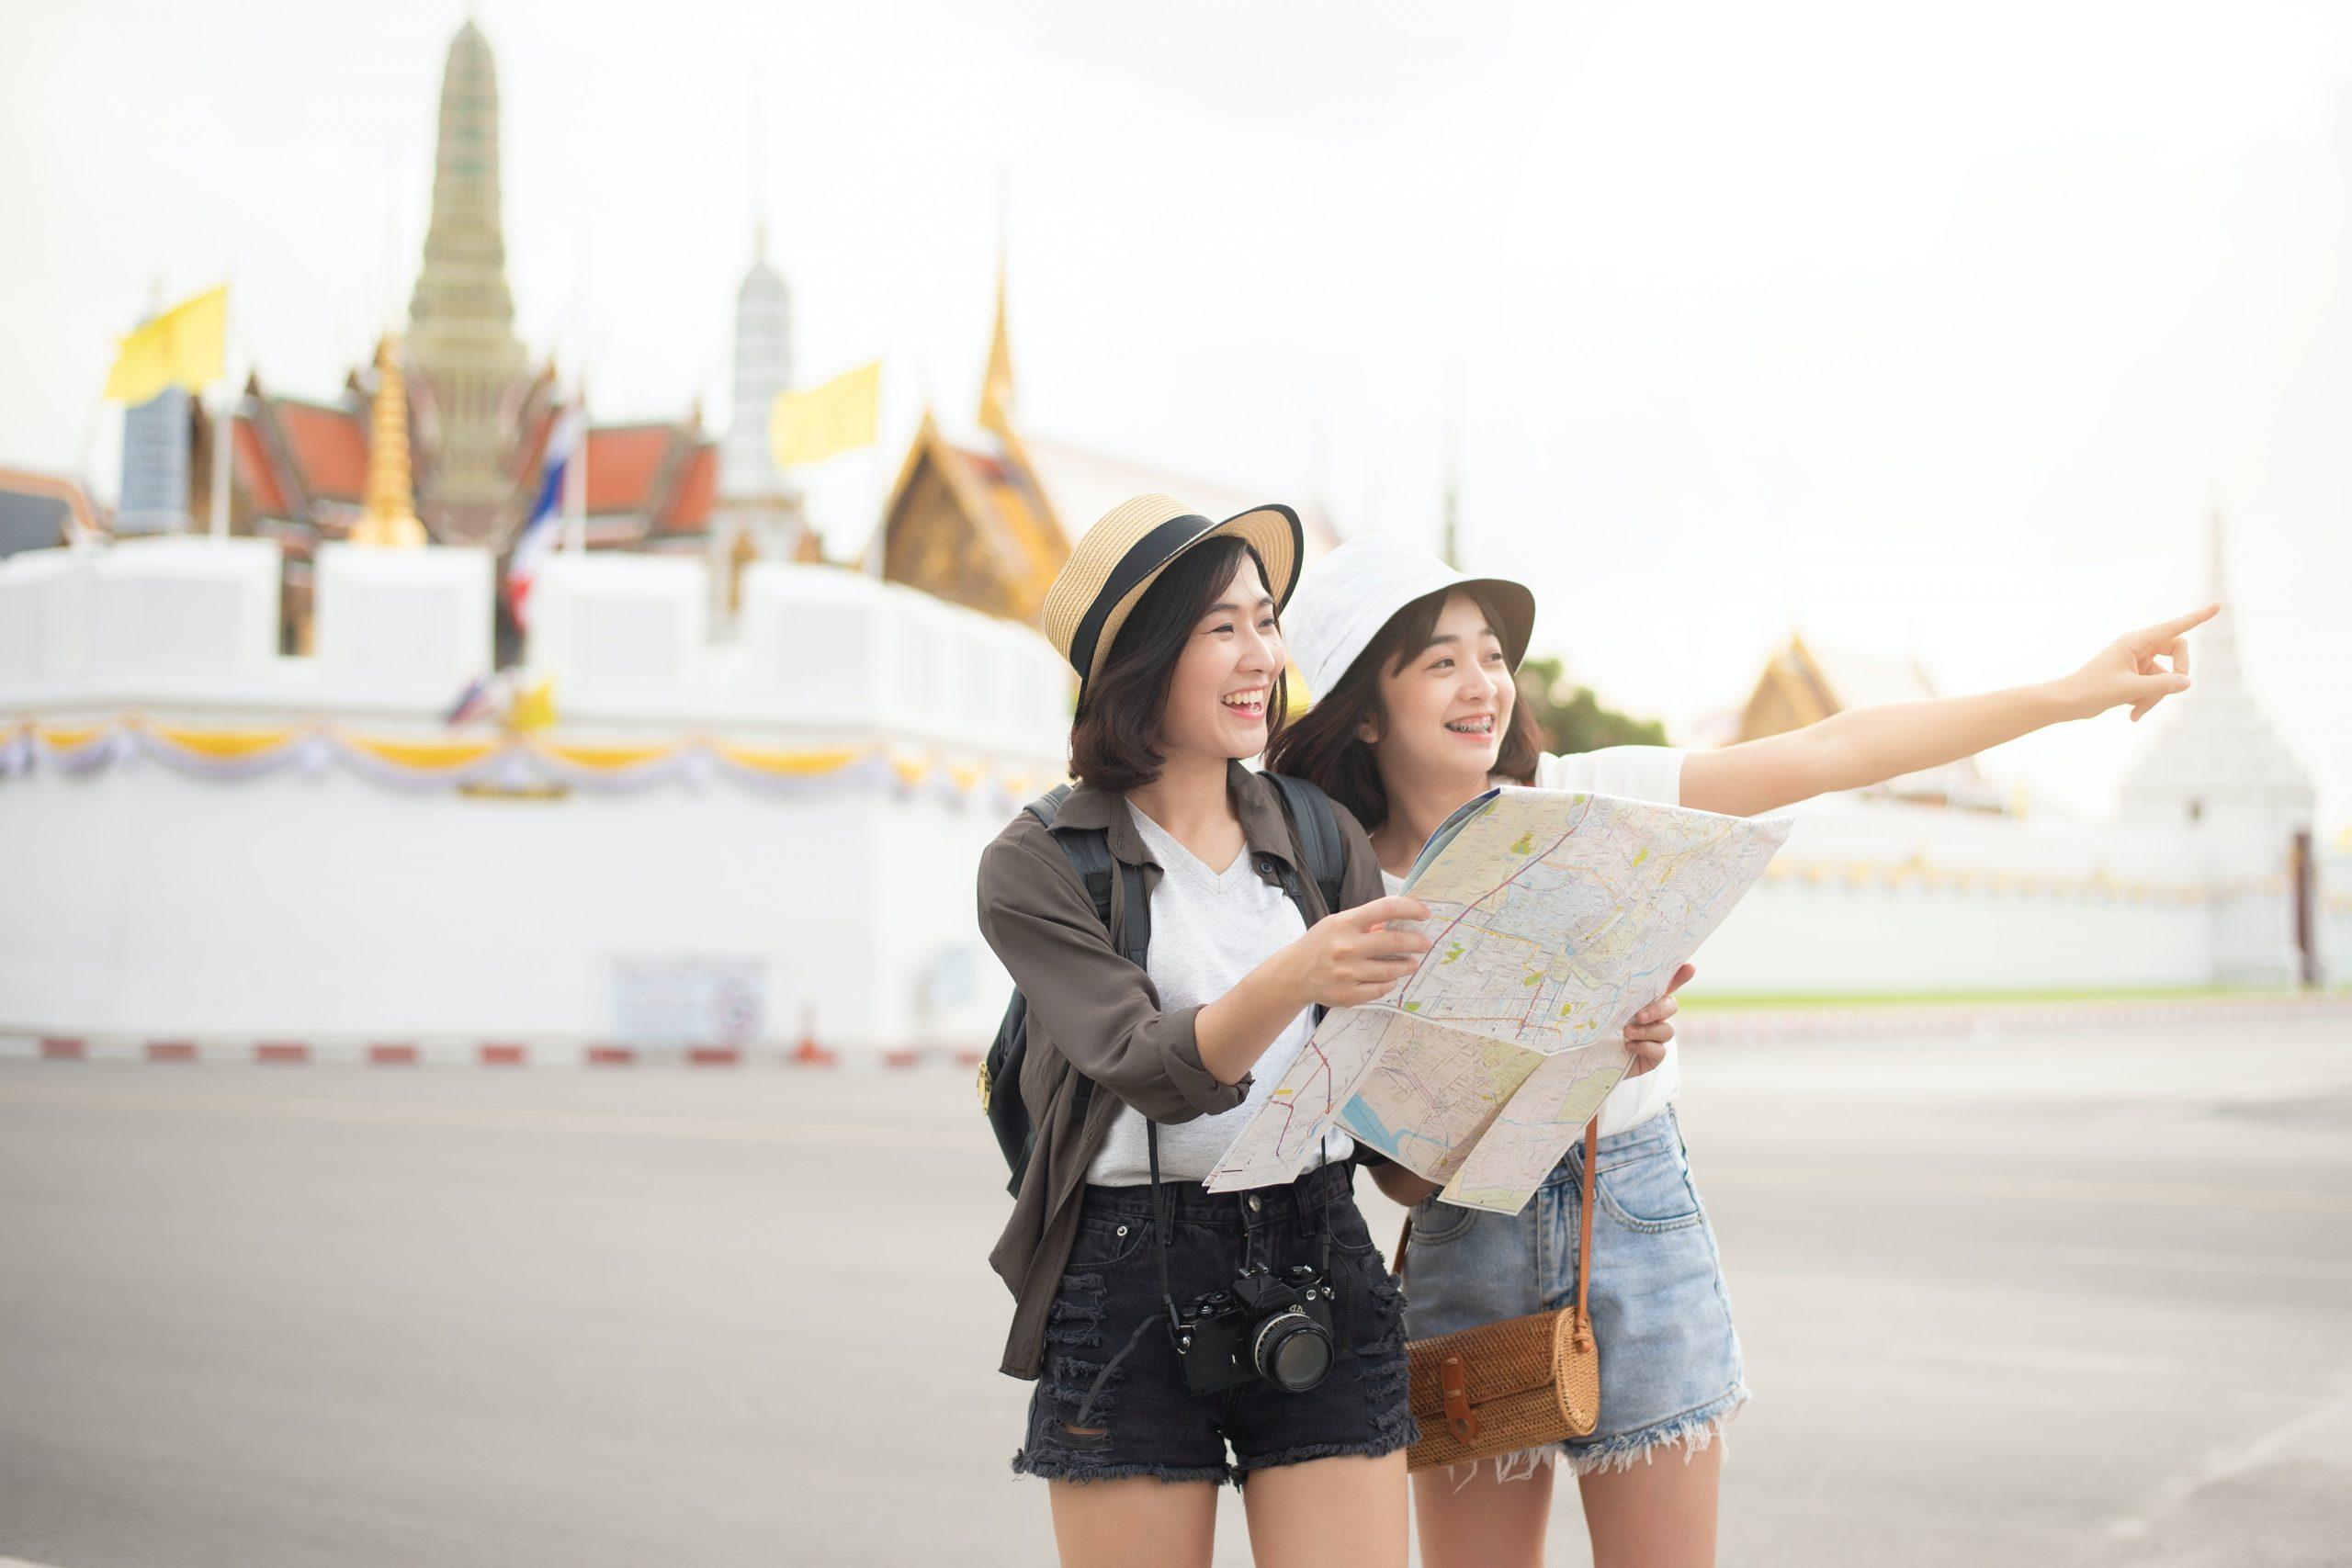 Thailand's tourism sector has been pleading for the government to reopen the country to foreign travellers. Photo: Pexels